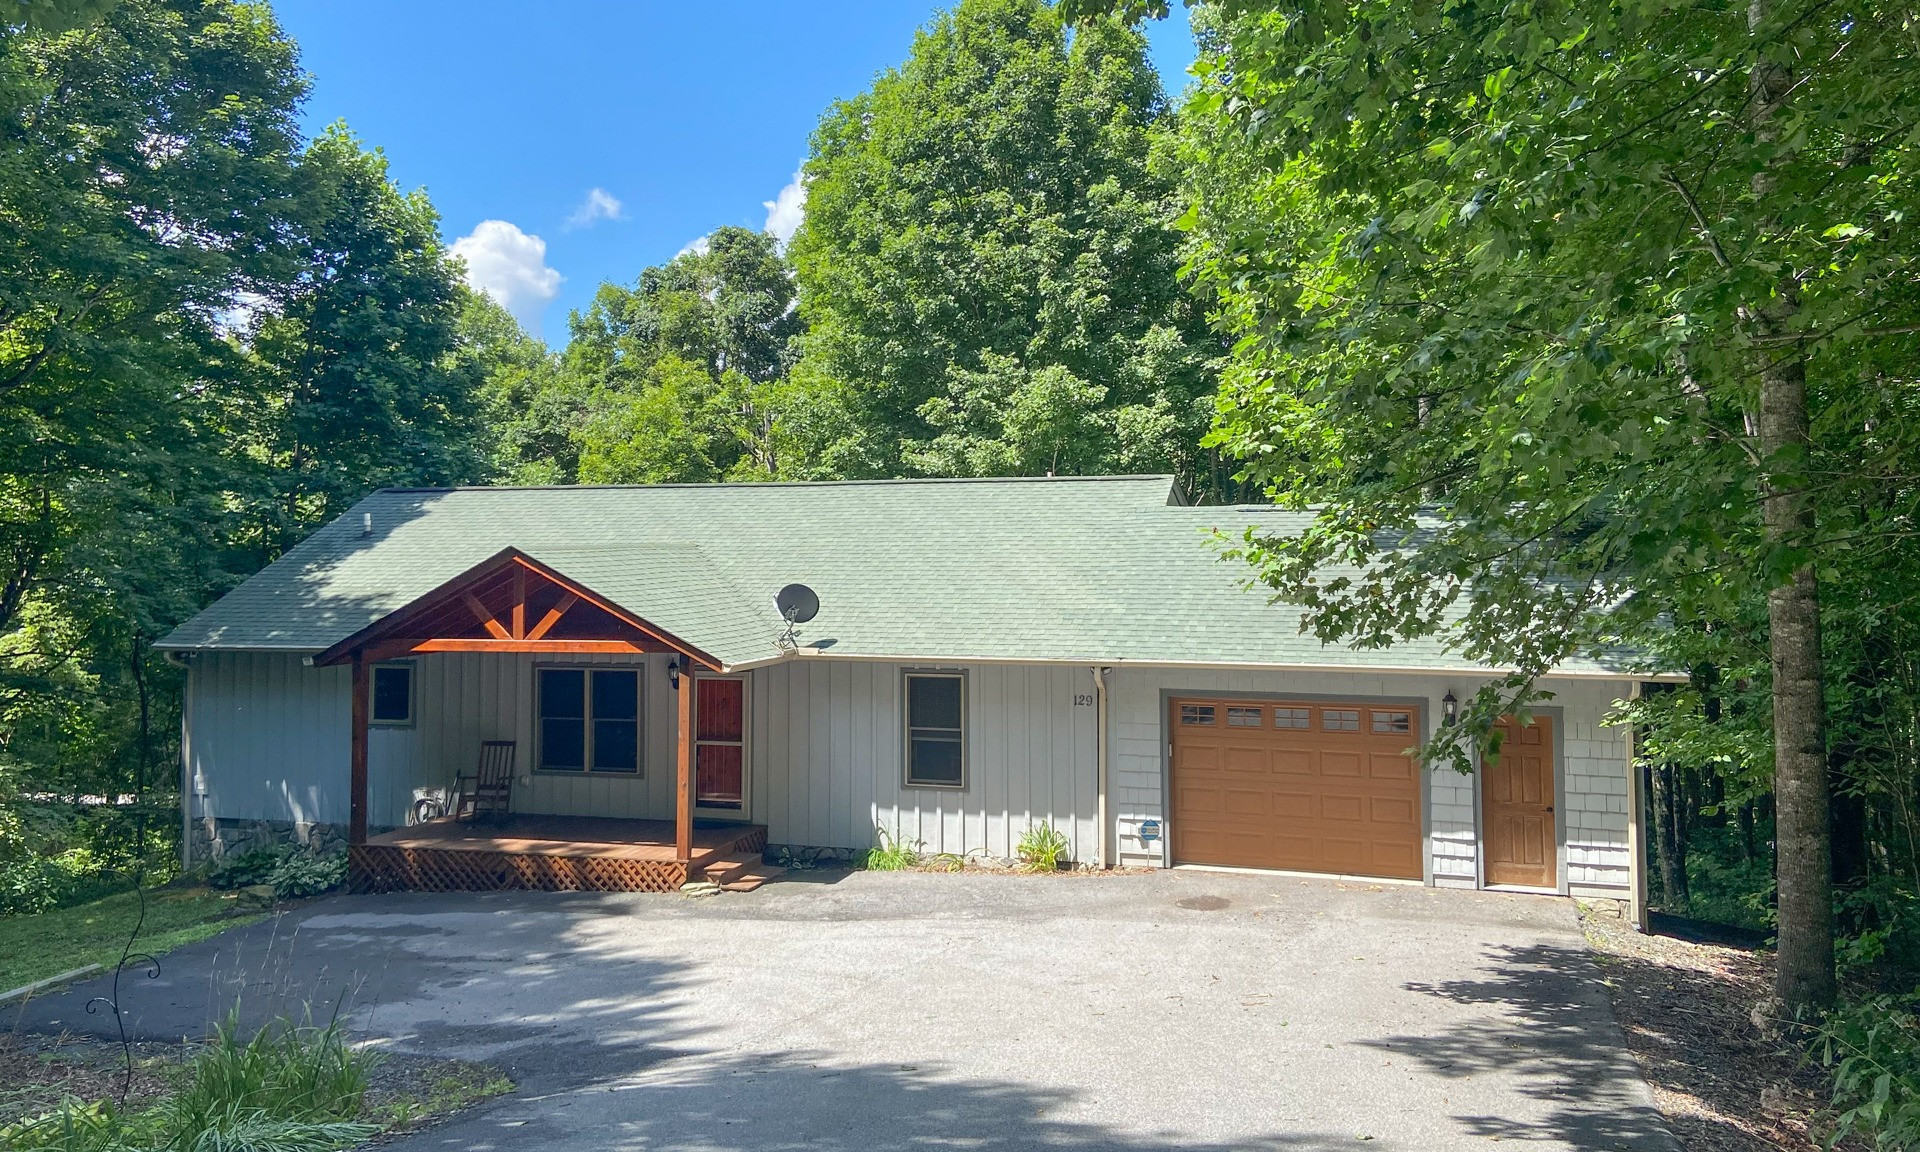 Find your "Happy Place"  here at this cozy 3-bedroom, 2-bath mountain cottage  nestled on a beautifully wooded mountain setting in Quail Ridge community just minutes from downtown West Jefferson in the North Carolina Mountains.